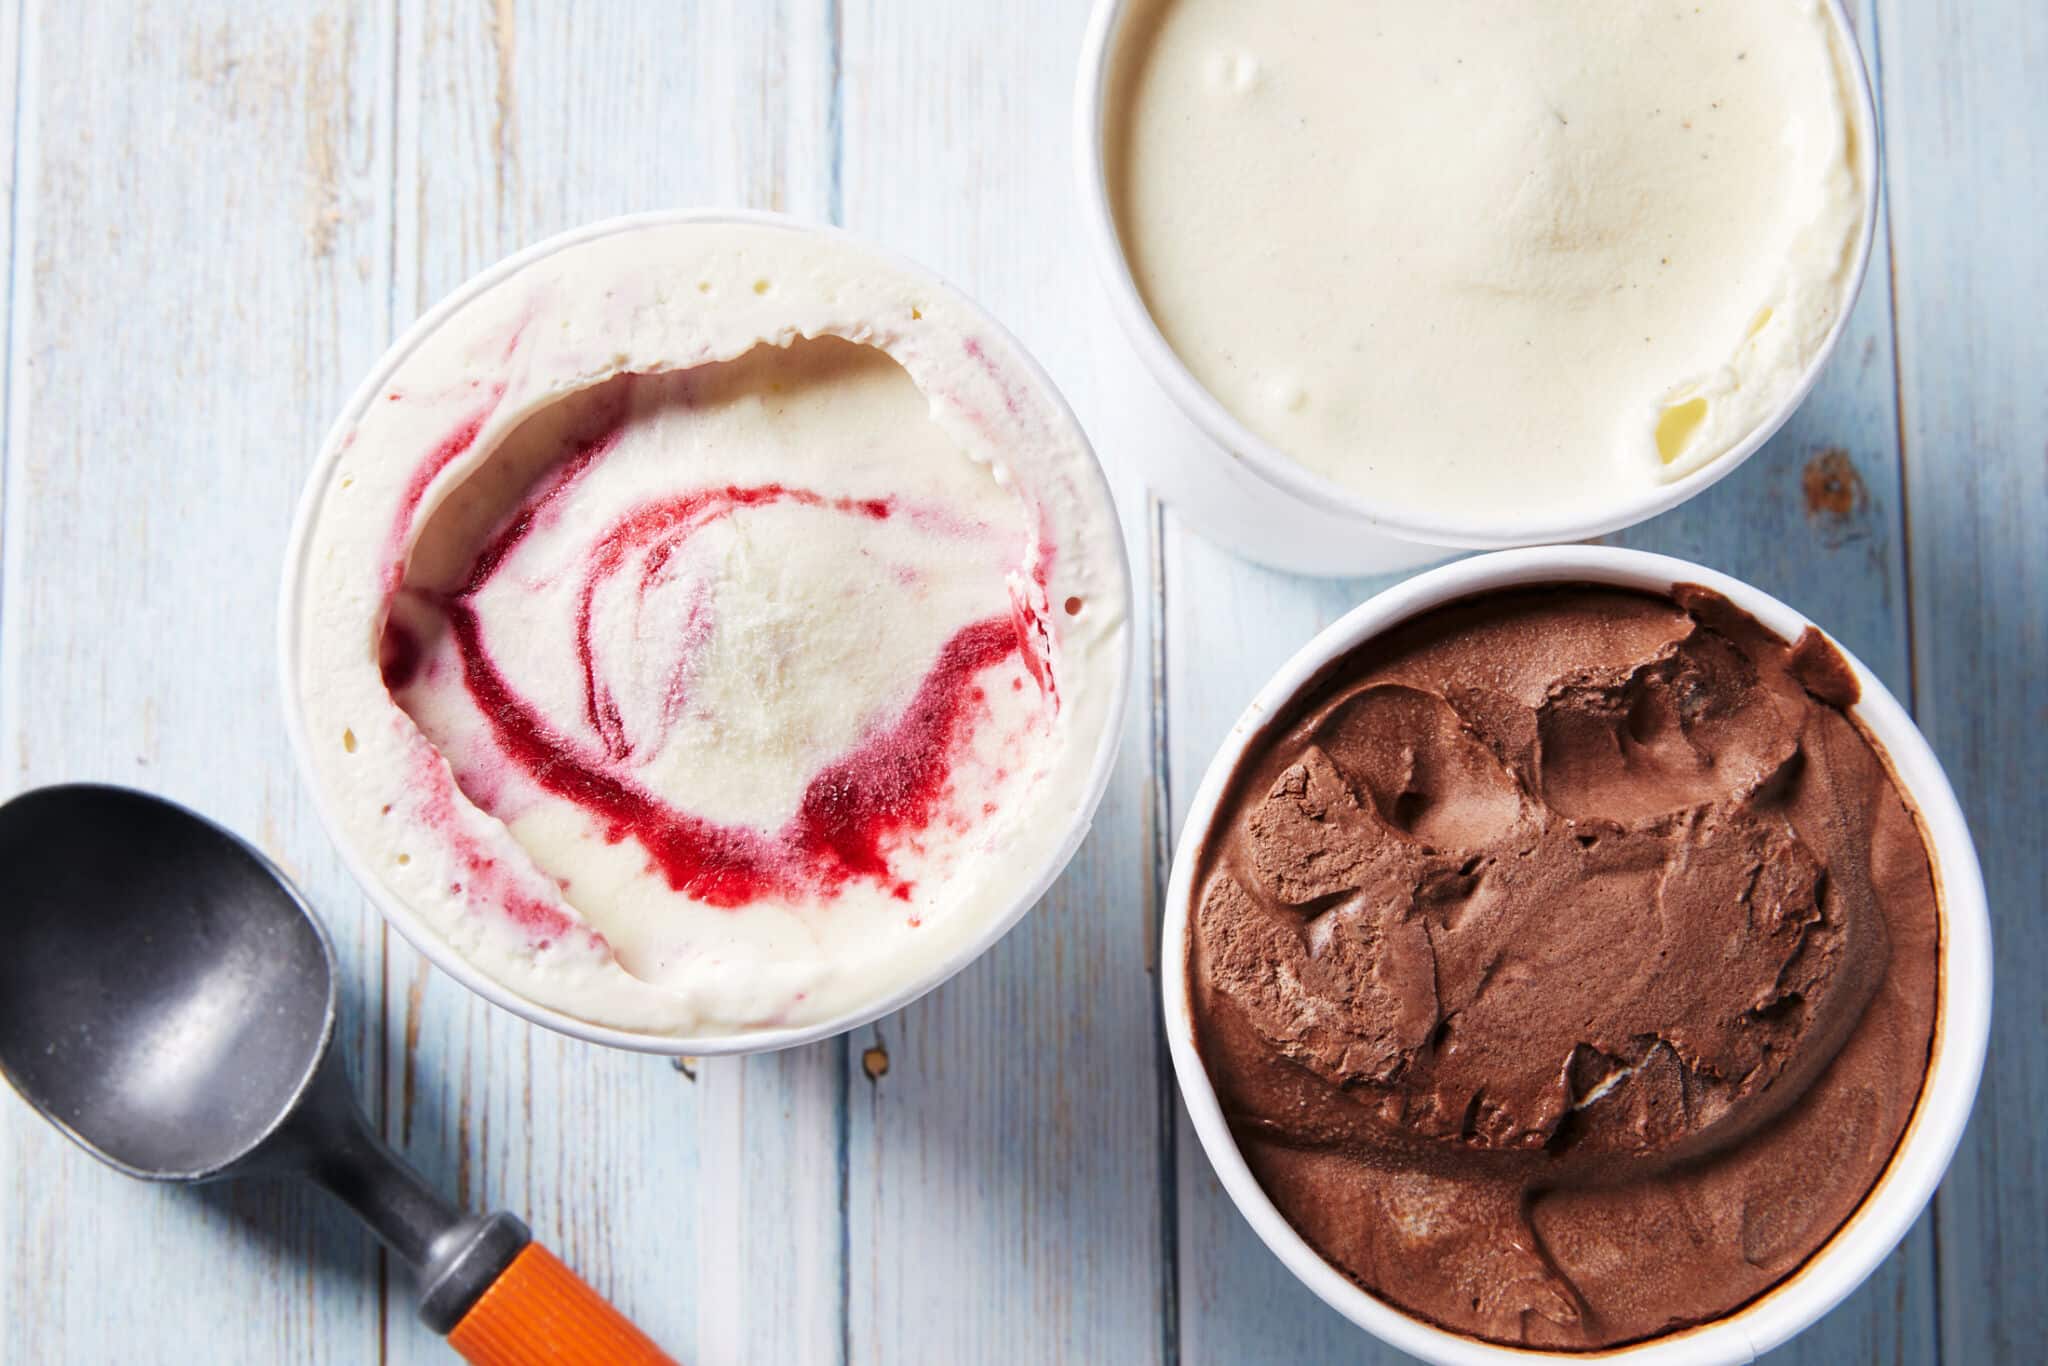 An over-head shot at 3 containers of thick, smooth No-Churn Artisanal Ice Cream in raspberry flavor, vanilla bean flavor, and chocolate flavor.